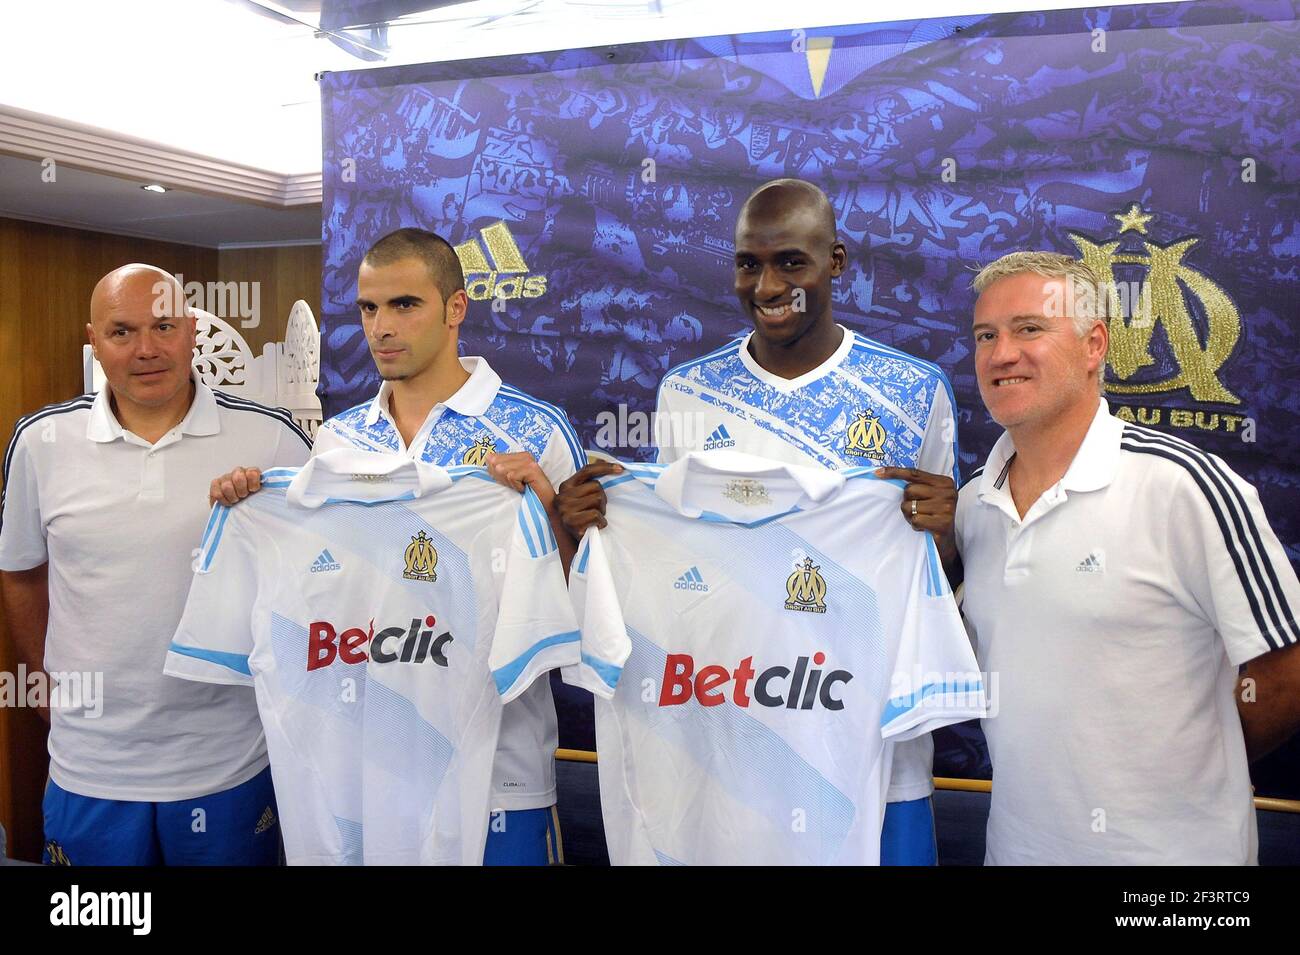 FOOTBALL - MISCS - FRENCH CHAMPIONSHIP 2011/2012 - LIGUE 1 -OLYMPIQUE MARSEILLE - 6/07/2011 - PHOTO PASCAL ALLEE / DPPI - PRESENTATION MARSEILLE'S NEWS PLAYERS GENNARO BRACIGLIANO AND ALOU DIARRA WITH JOSE ANIGO SPORTS DIRECTOR AT LEFT AND DIDIER DESCHAMP THE HEAD COACH AT RIGHT Stock Photo